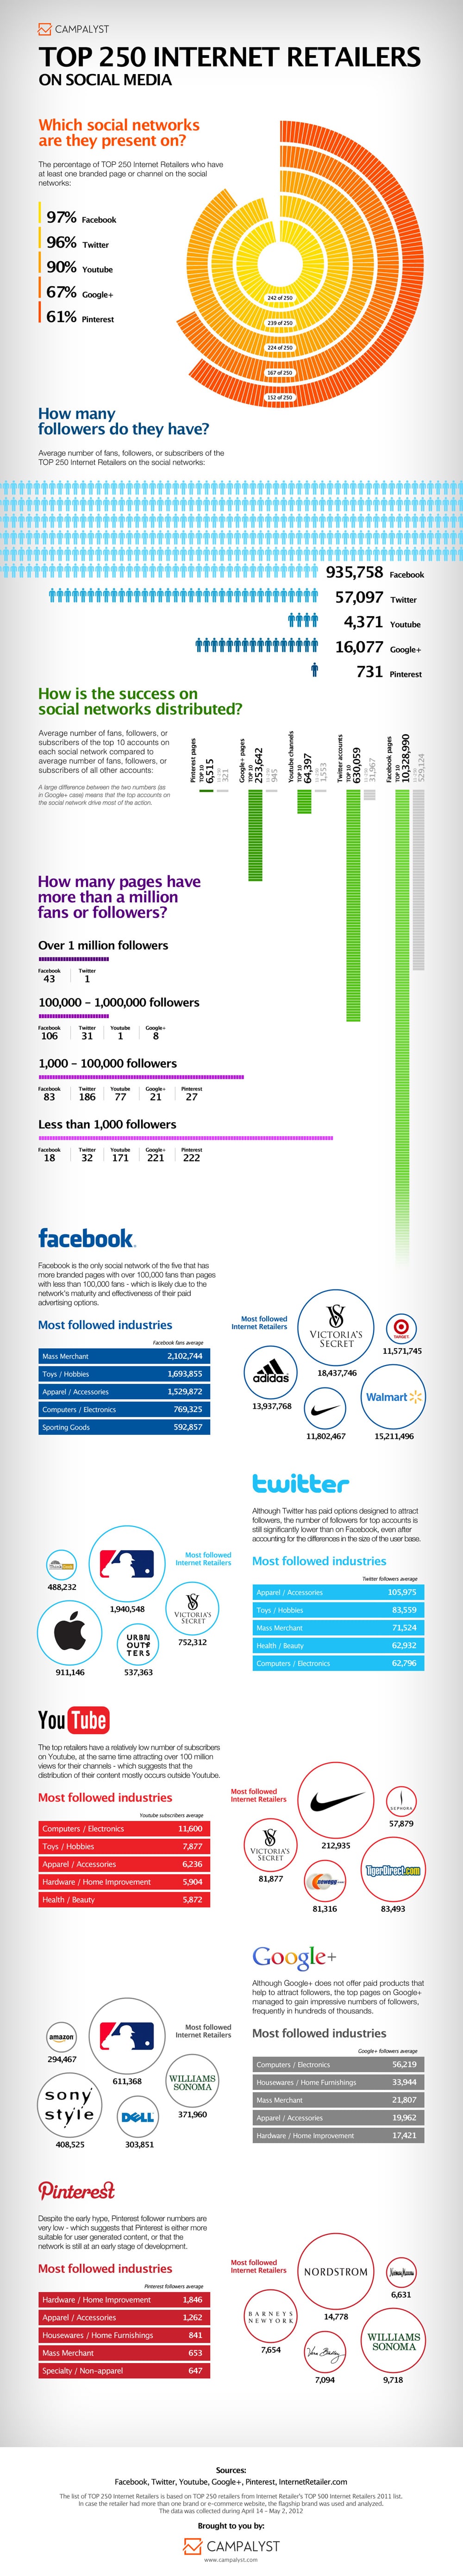 Brands In Social Media: How Popular You Need To Be [Infographic]